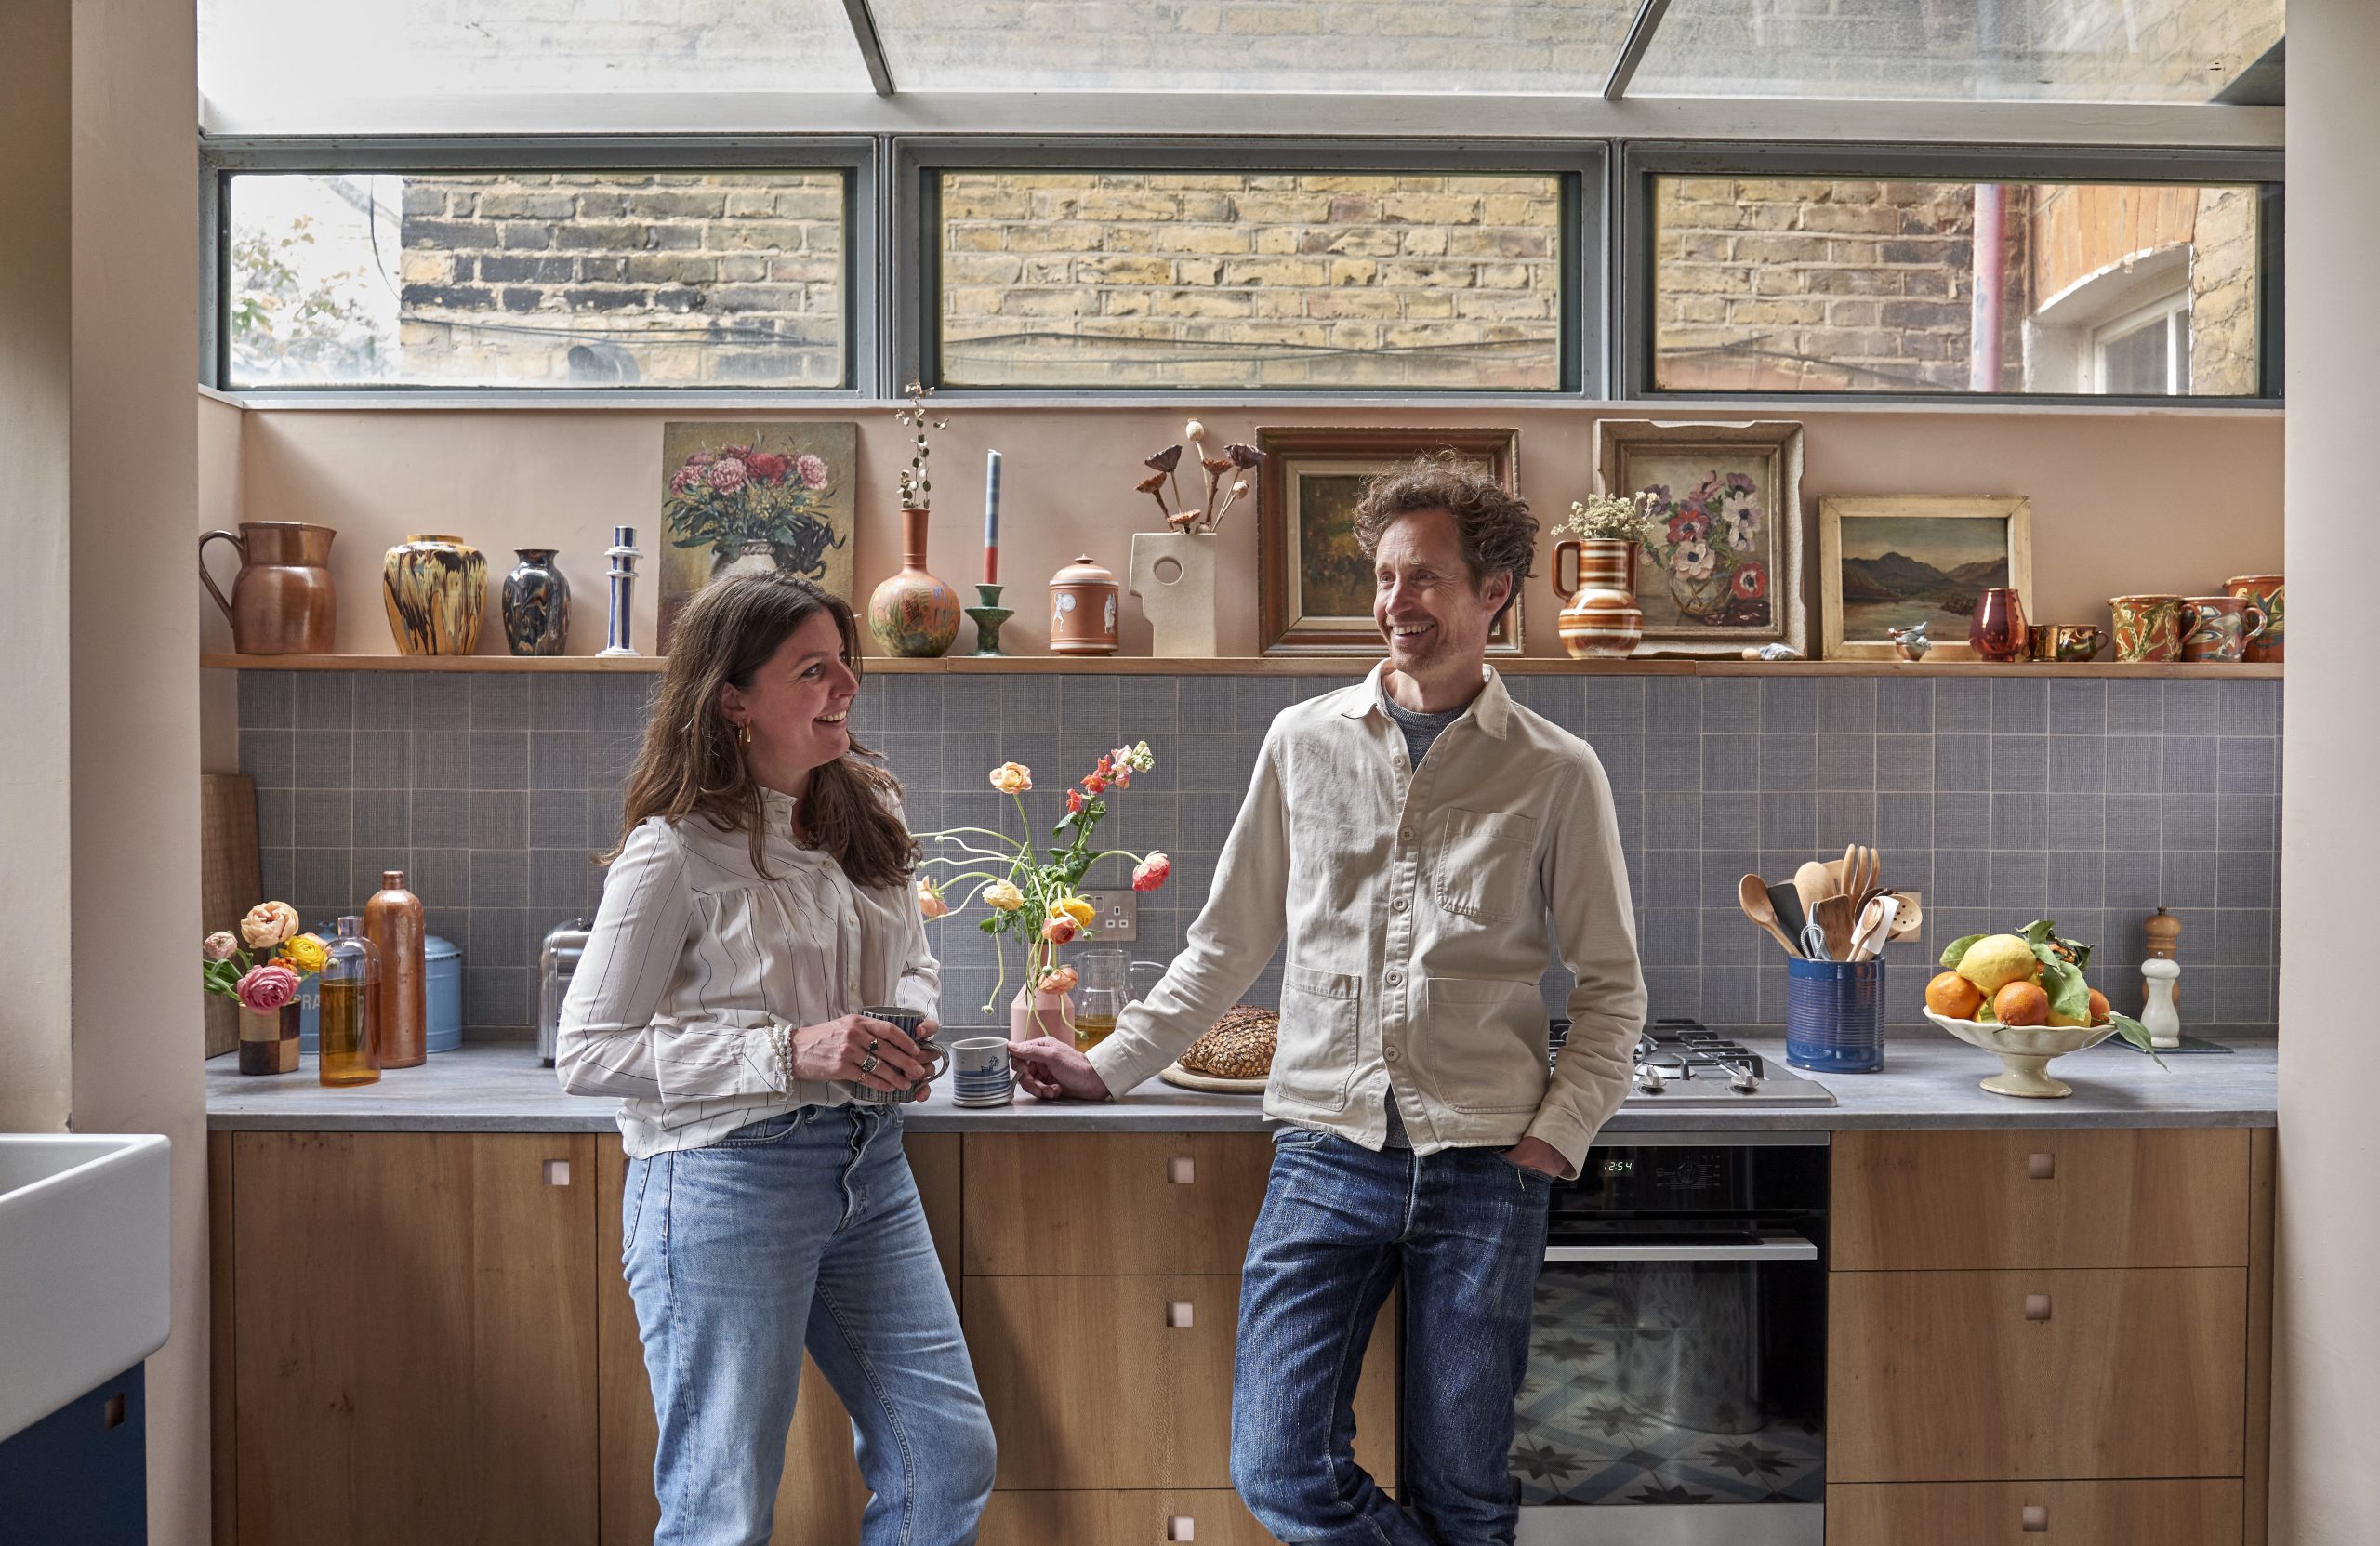 Leila Touwen and husband Lloyd of independent kitchen designers Pluck